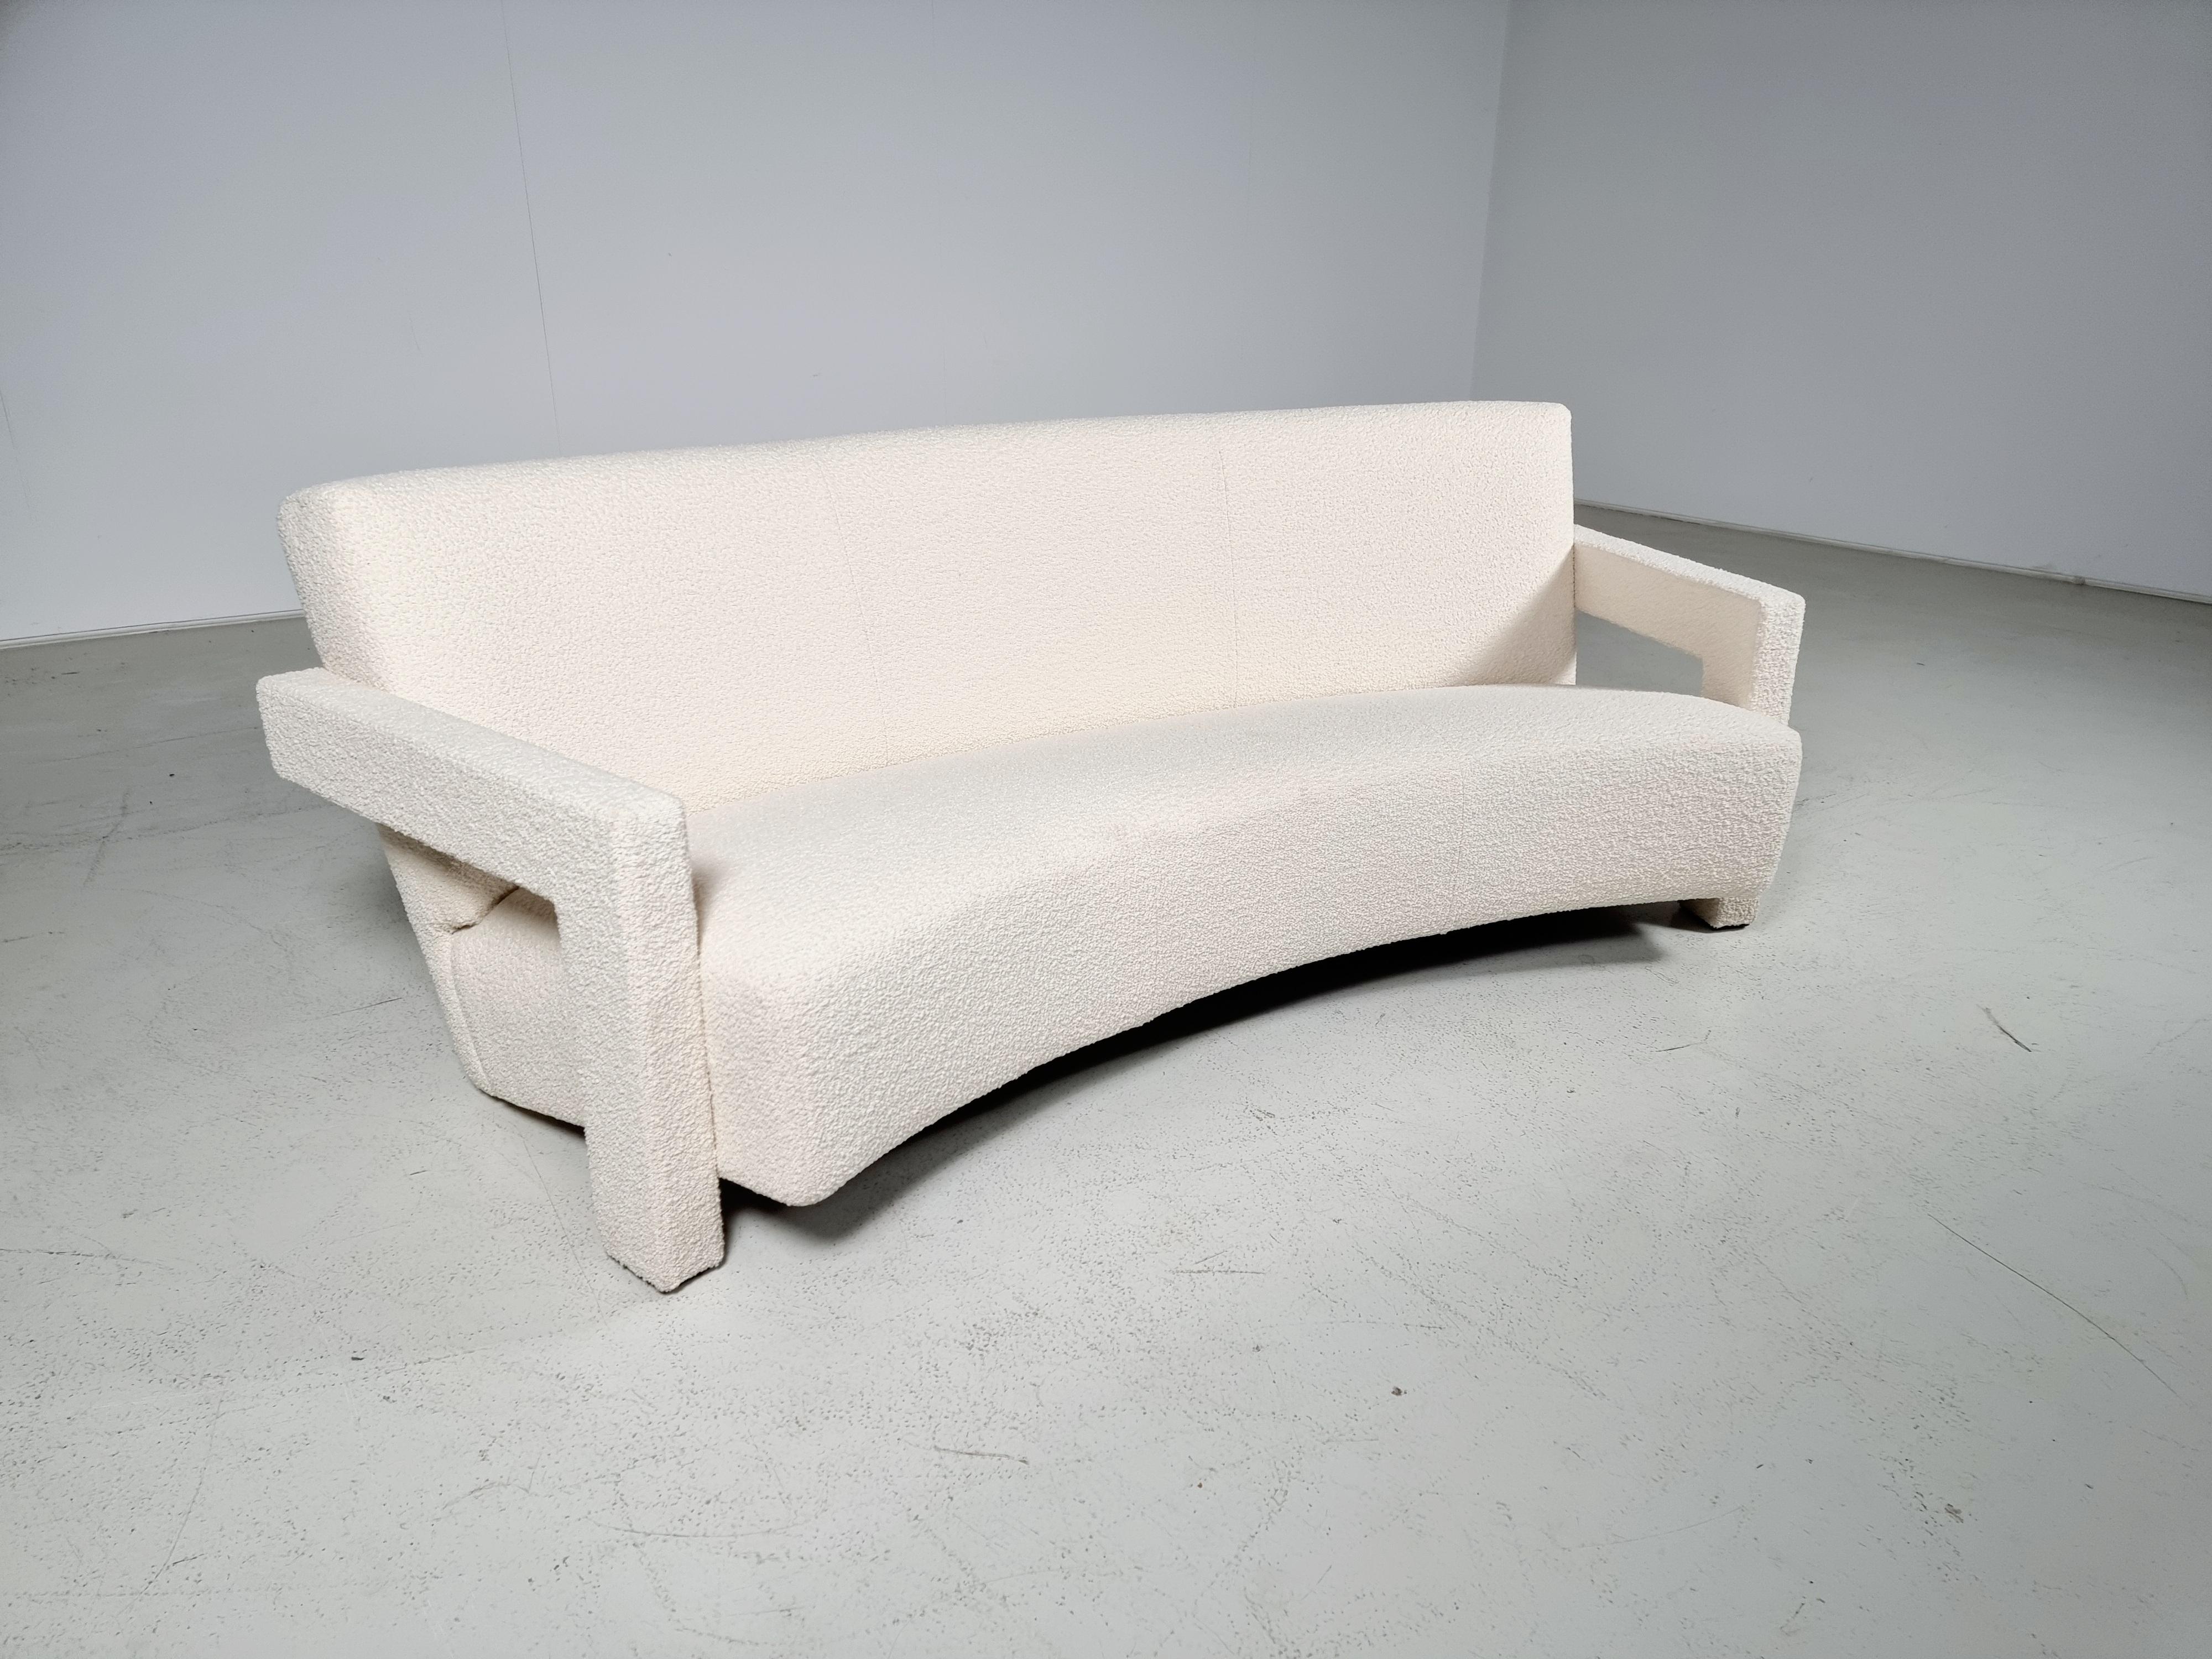 Original 637 curved ‘Utrecht’ sofa designed by Gerrit Thomas Rietveld, the Netherlands, designed 1935. This sofa is from the Cassina collection 1990s
Reupholstered in a Bergamo 2 creme boucle by Bisson Bruneel France.